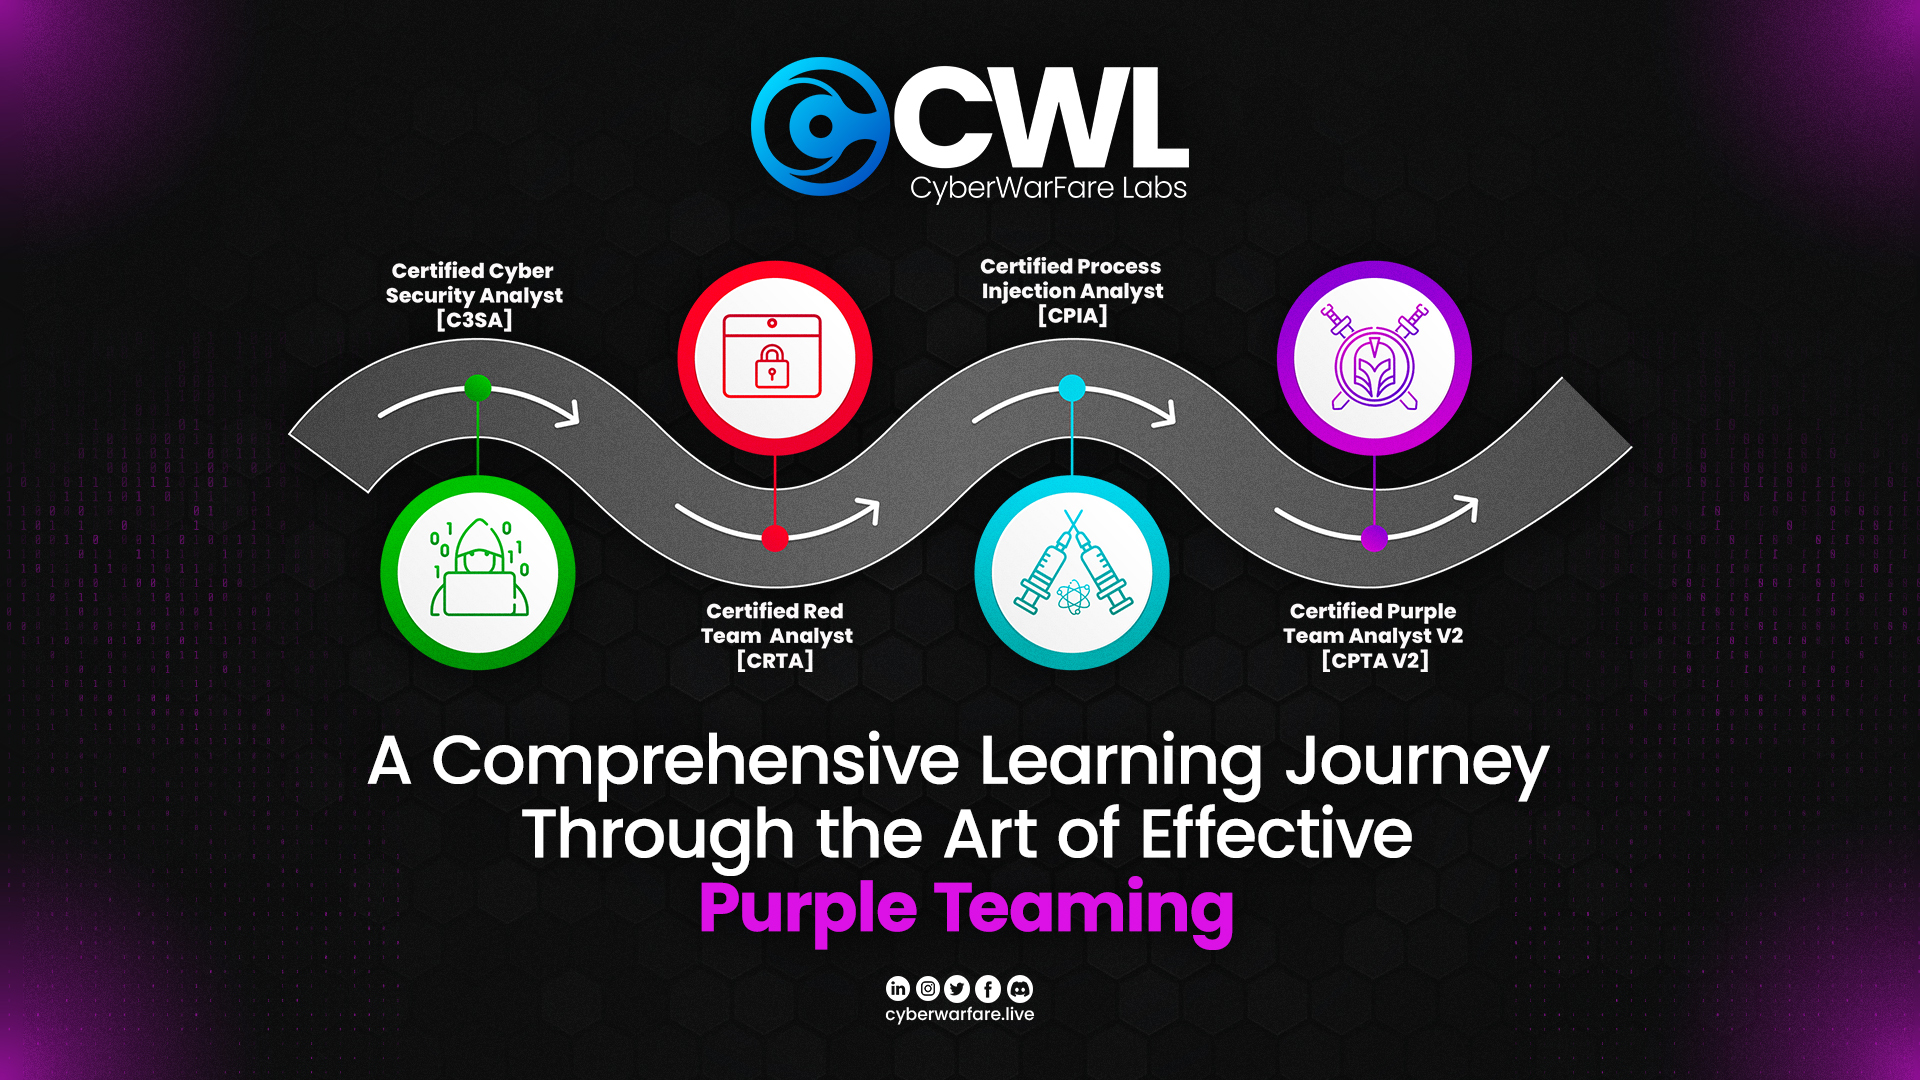 A Comprehensive Learning Journey Through the Art of Effective Purple Teaming